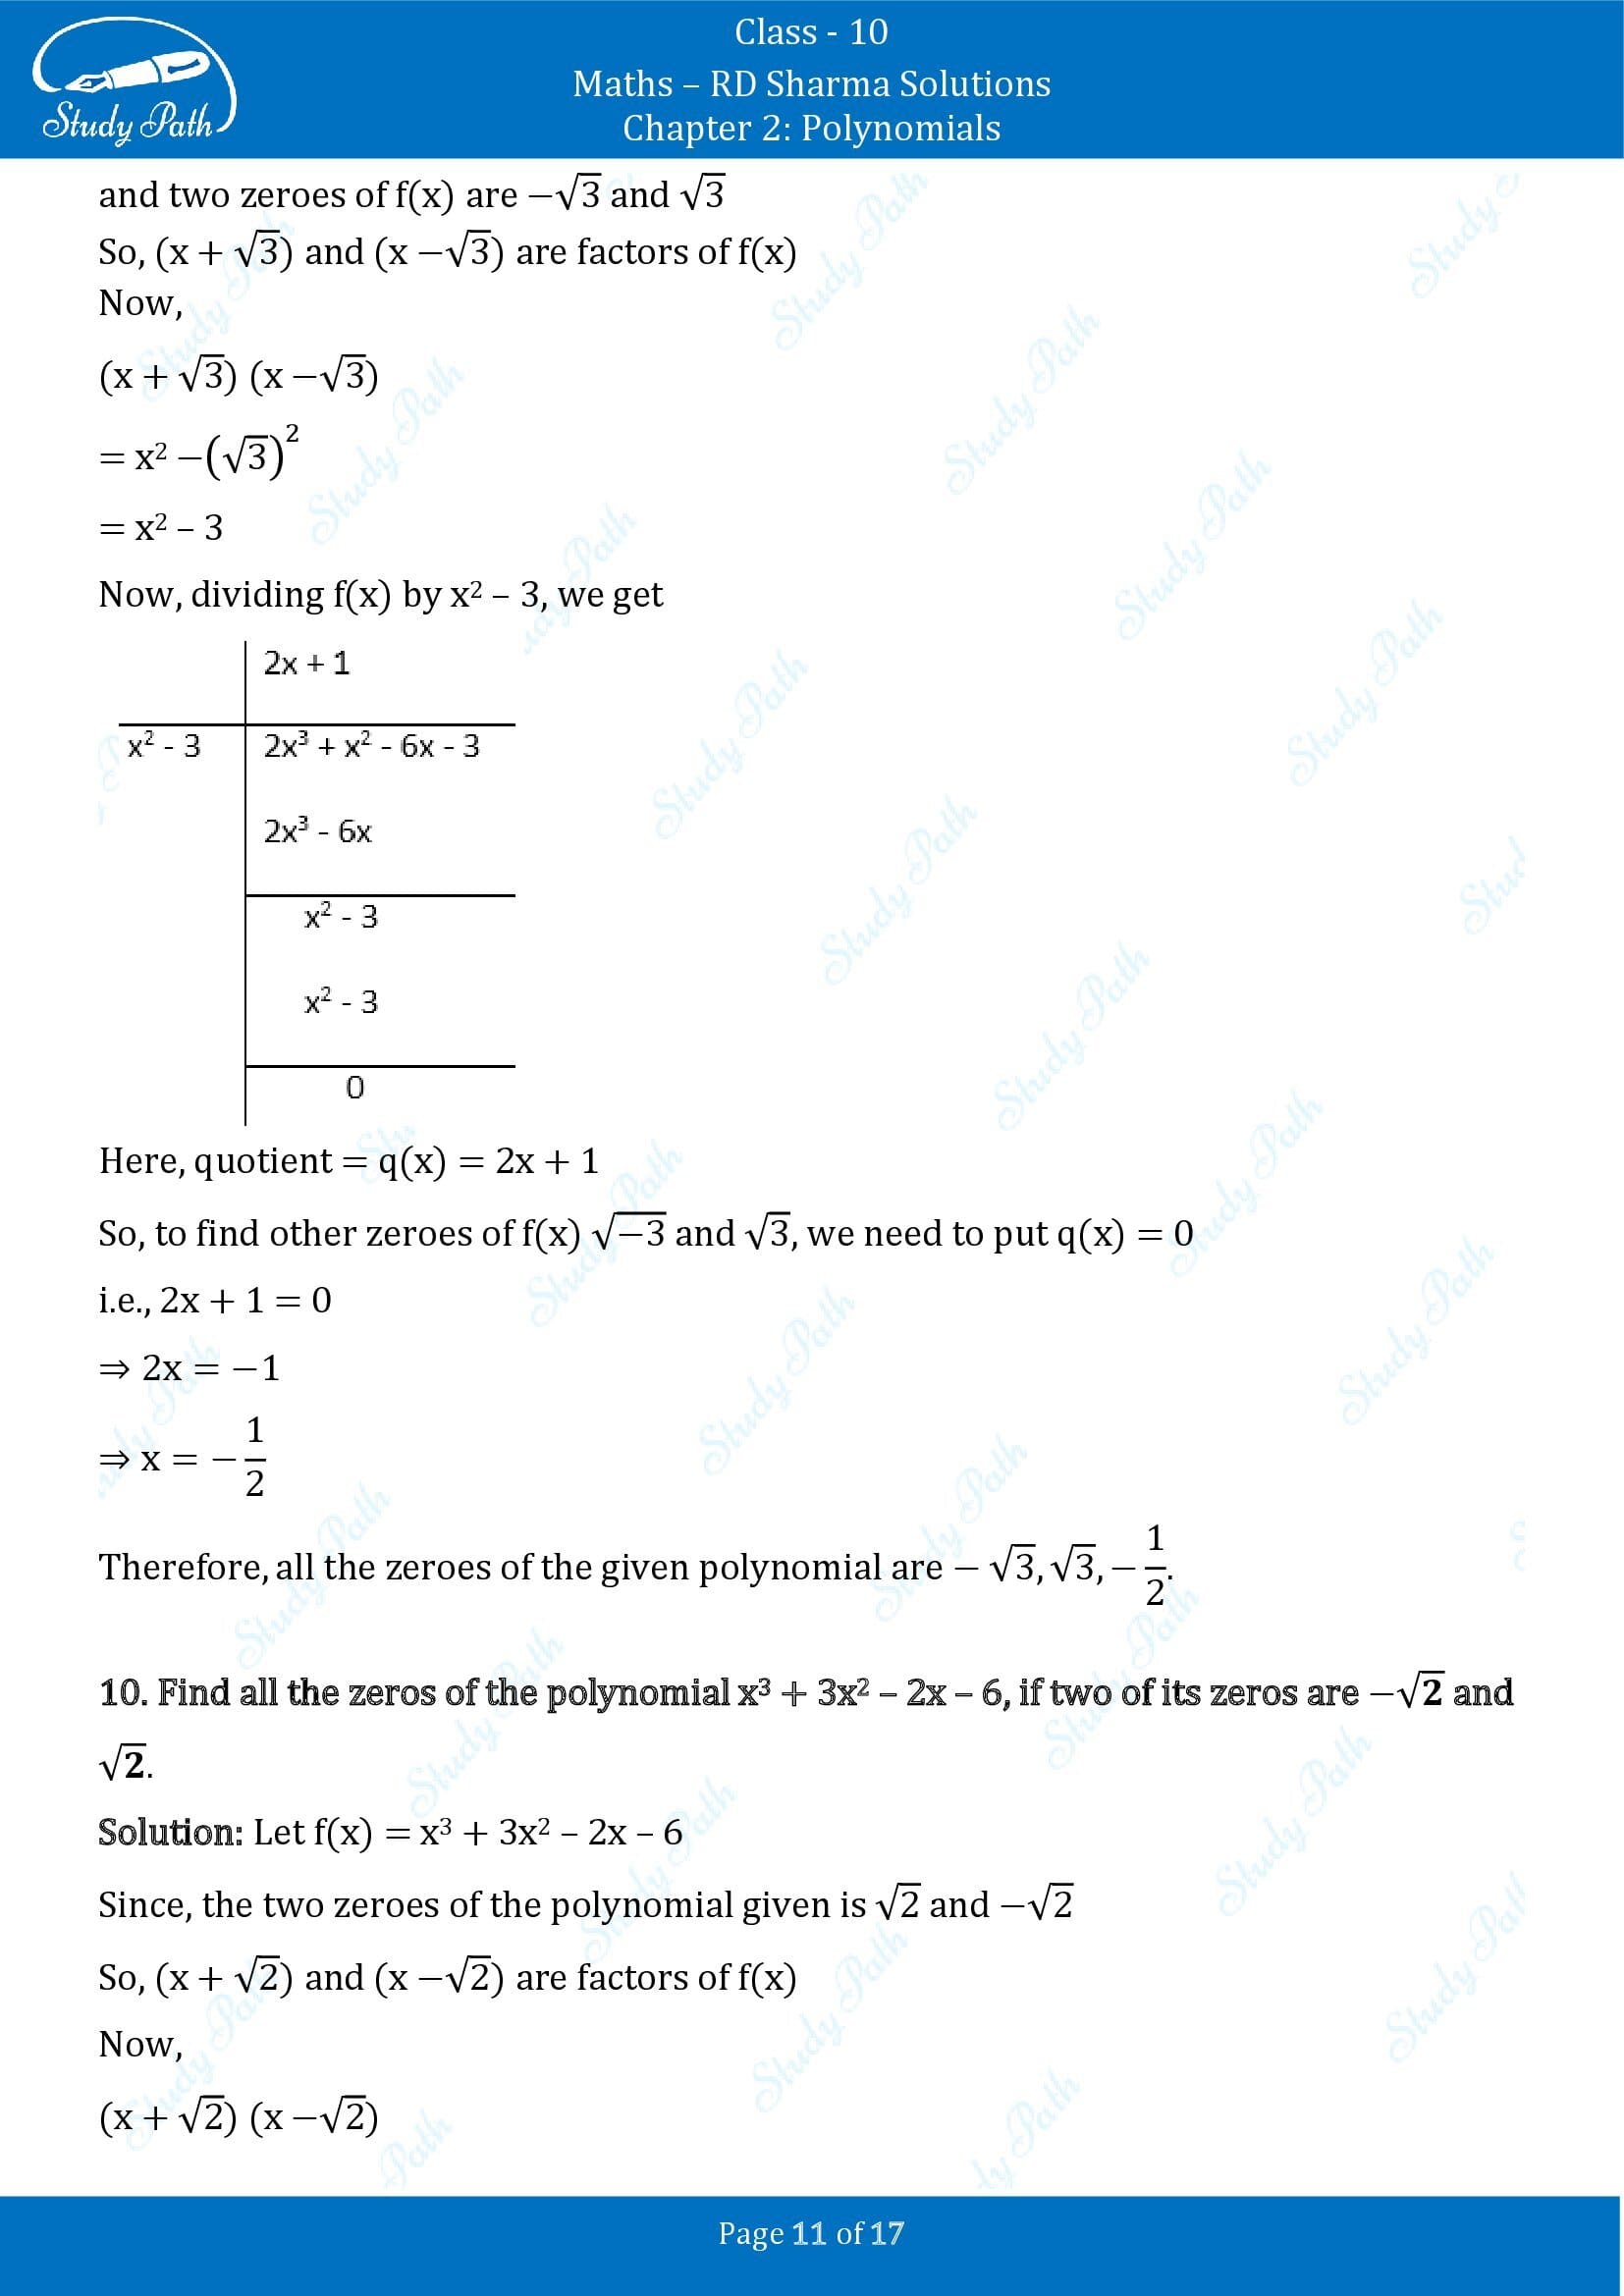 RD Sharma Solutions Class 10 Chapter 2 Polynomials Exercise 2.3 00011